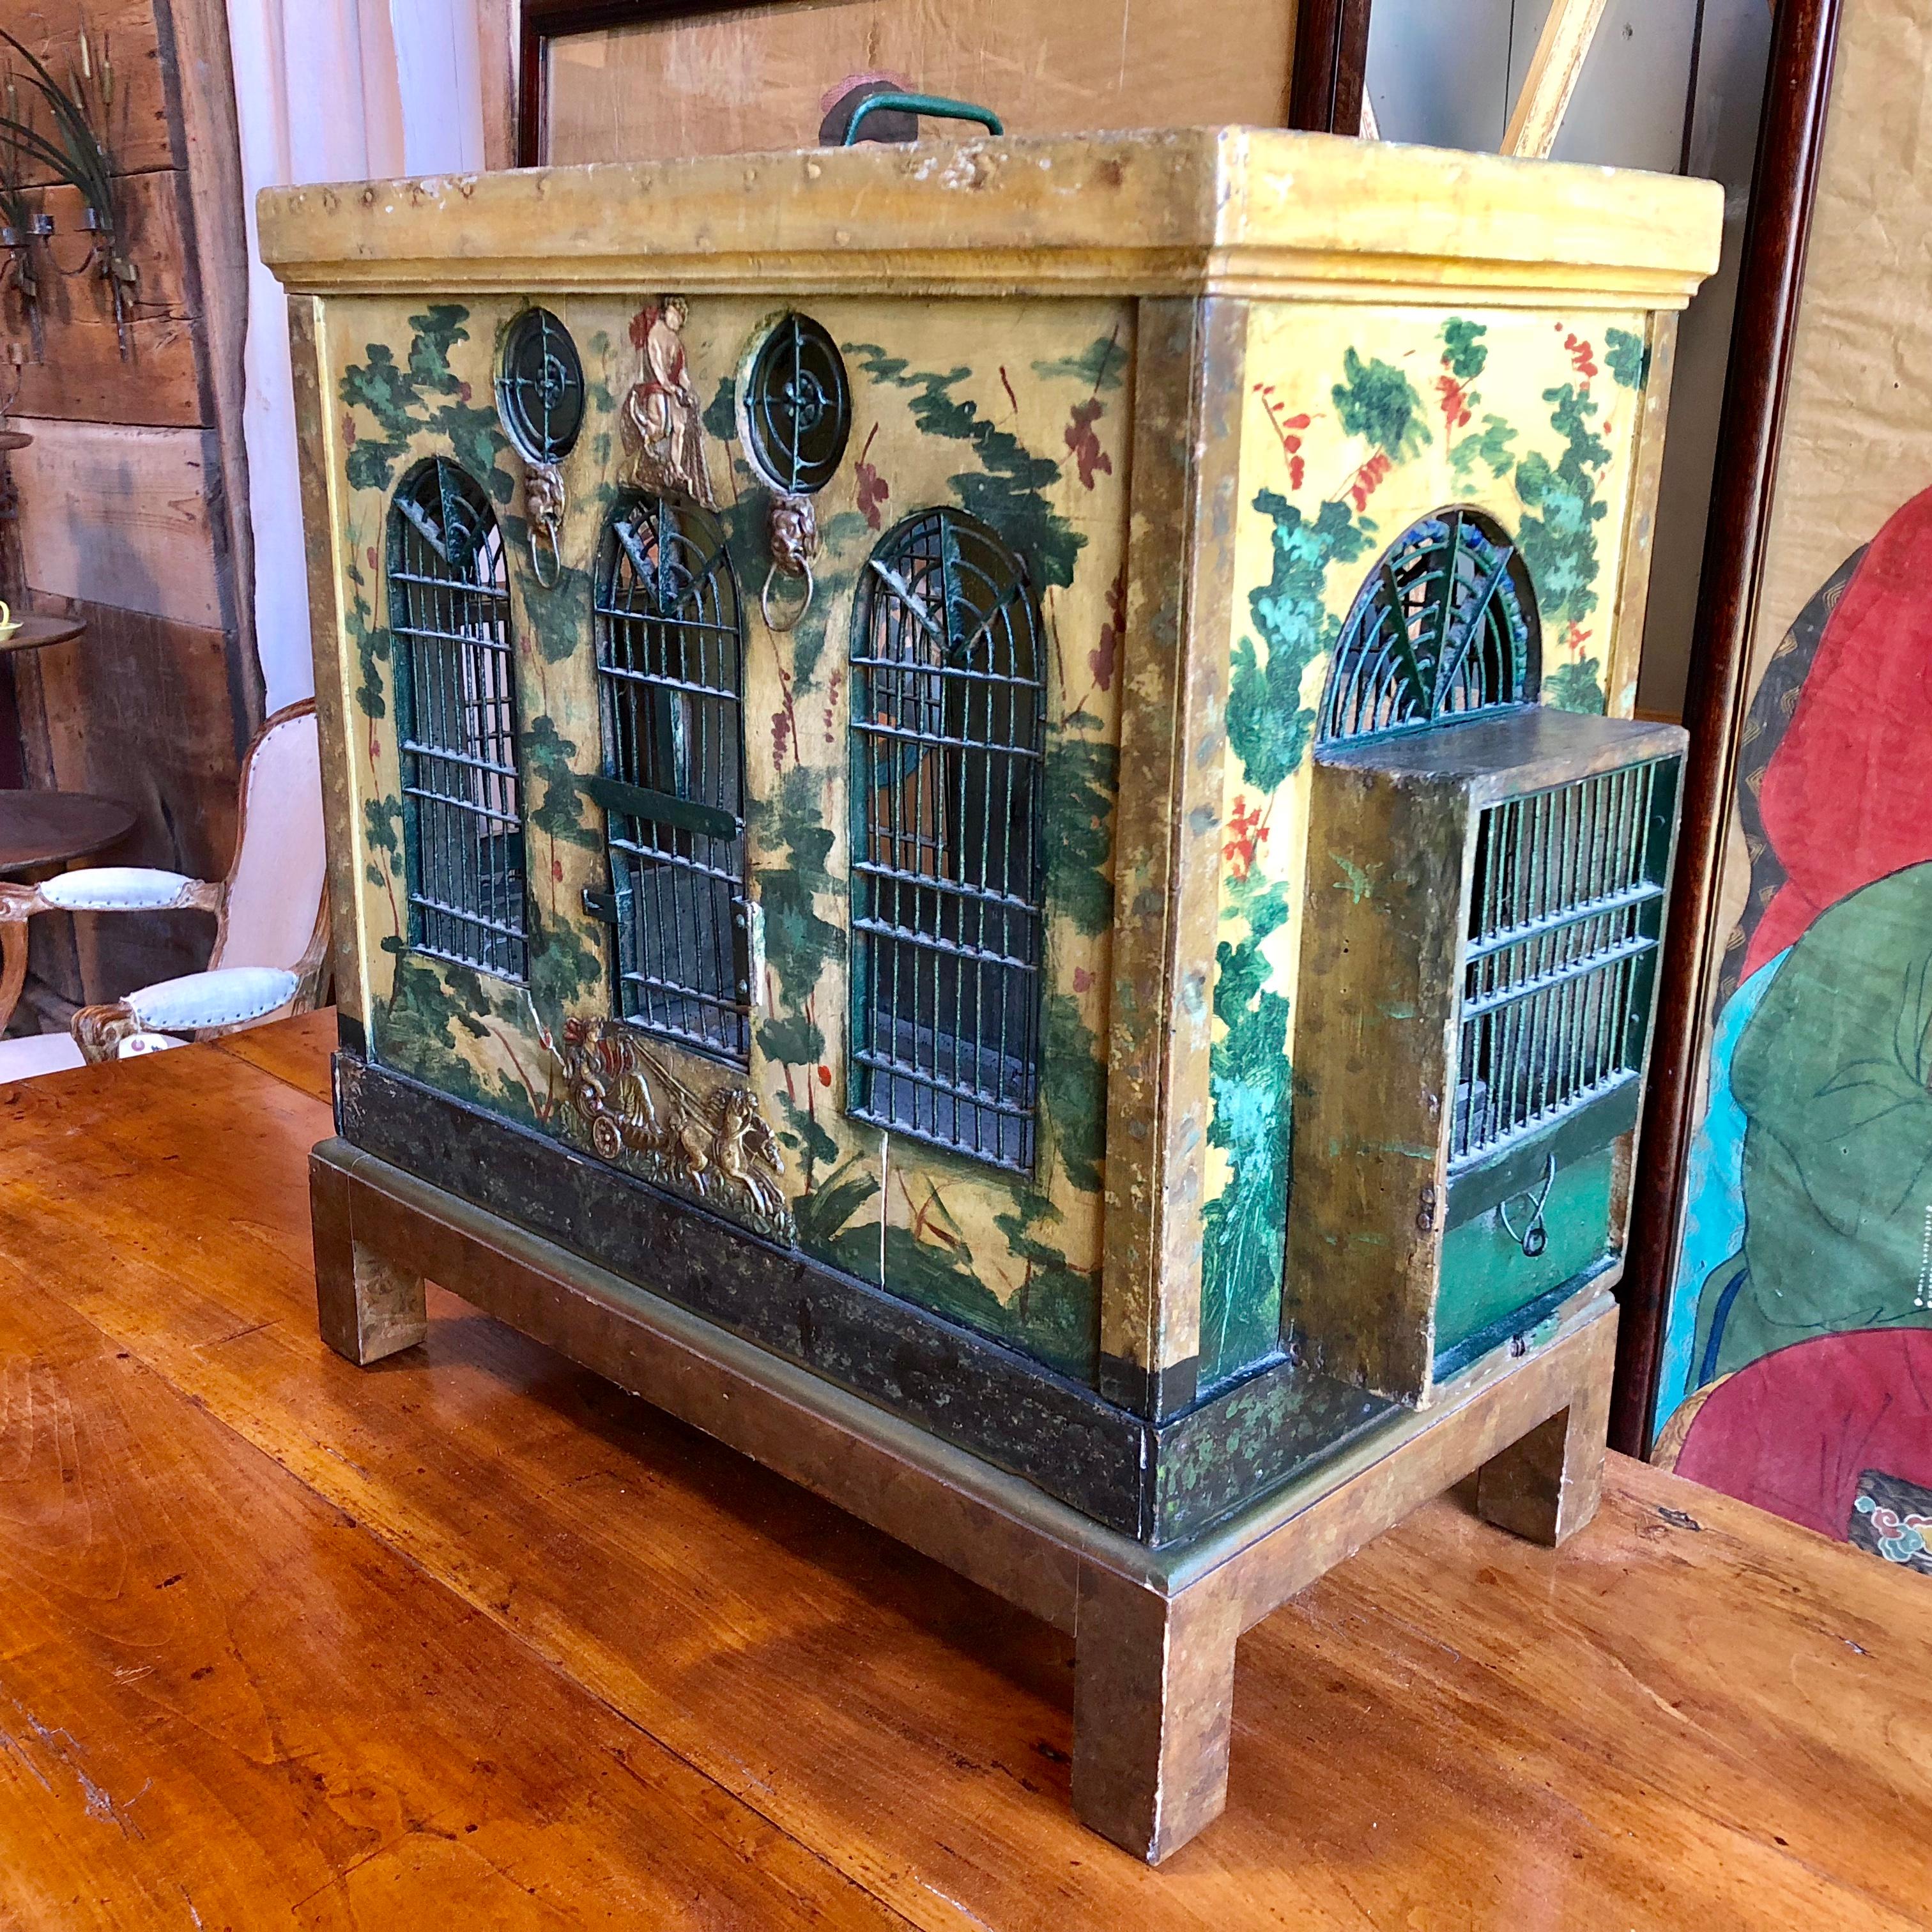 A charming Provincial French folk-art birdcage circa 1850 in wood and wire with painted brass decorative appliques, Palladian style wire windows, bird feeding trays, cobalt blue glass beads, cleaning tray and air vents. Painted with vines and